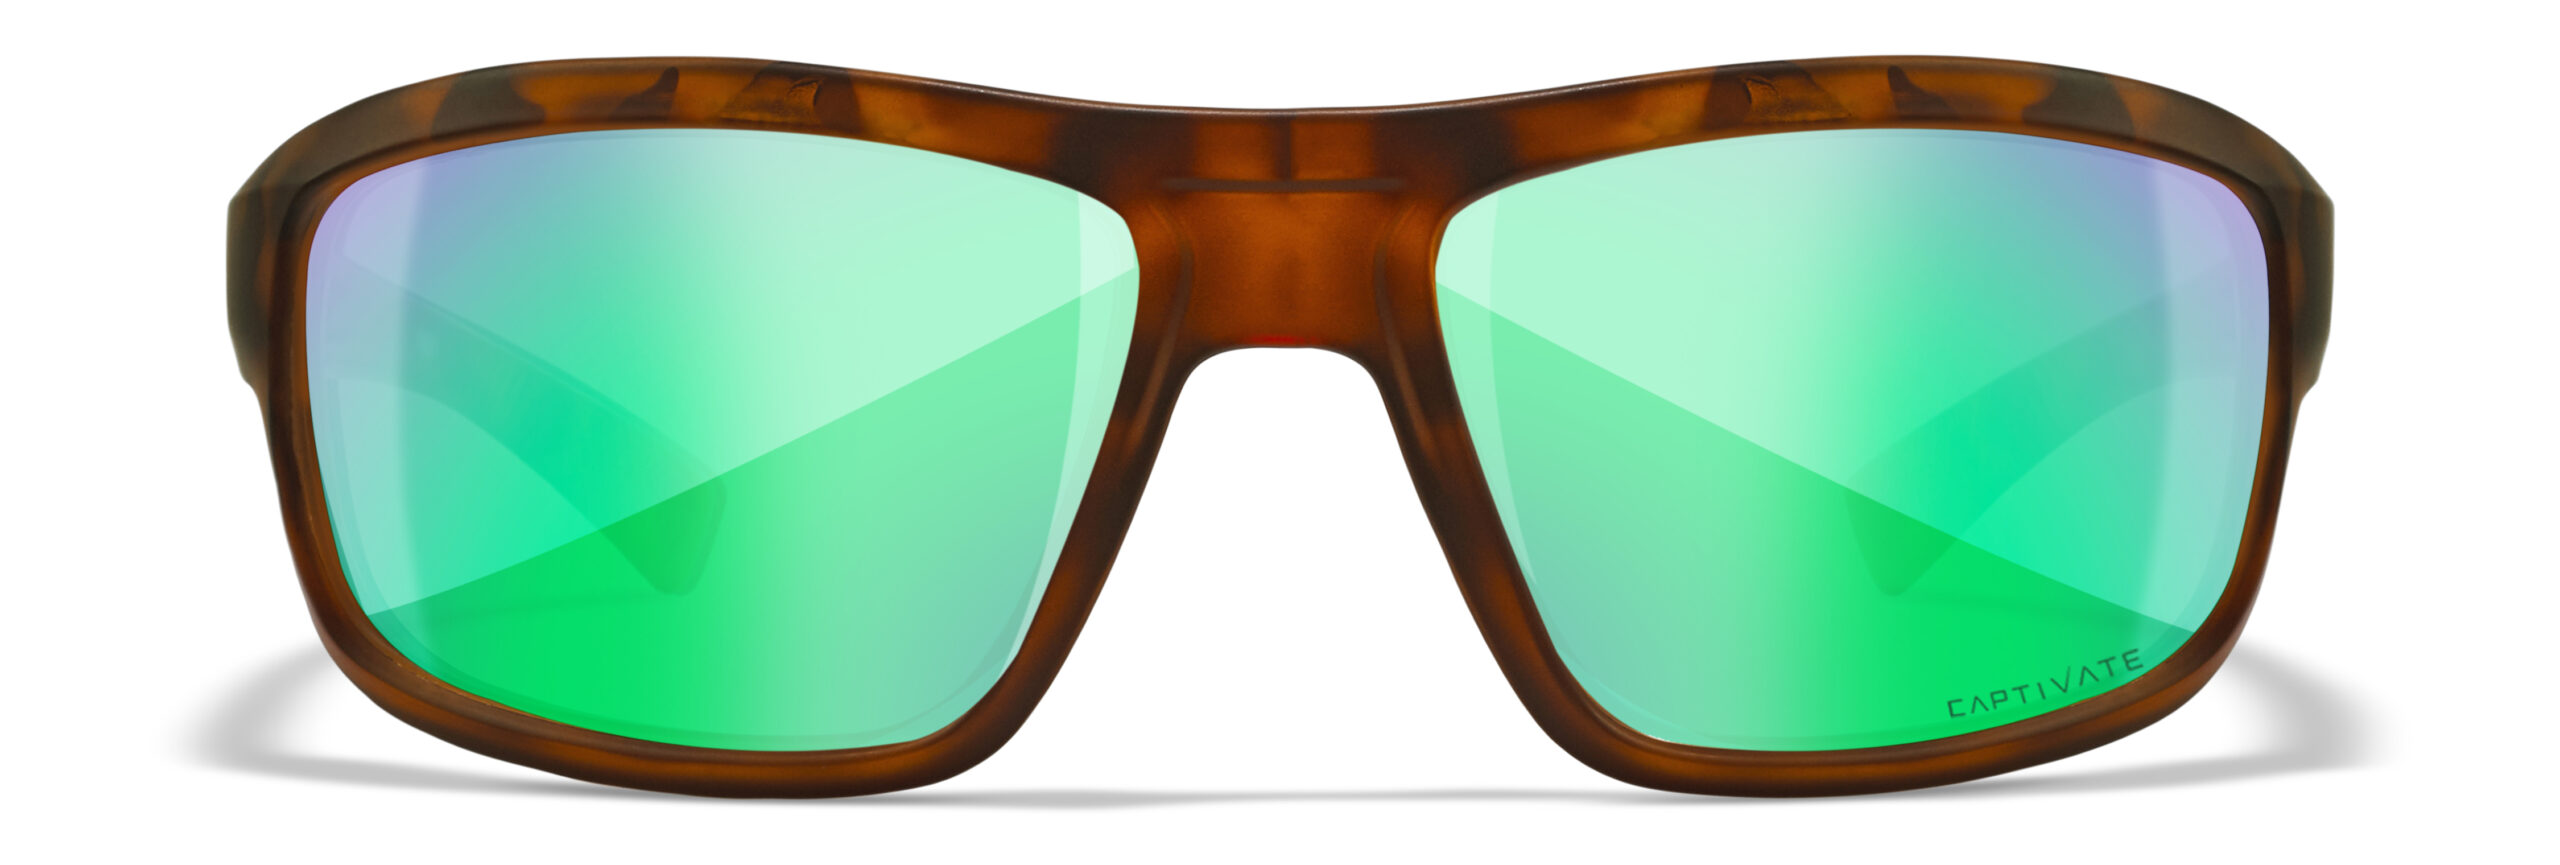 WX Contend Front - Matte Demi Frame with Green Lens